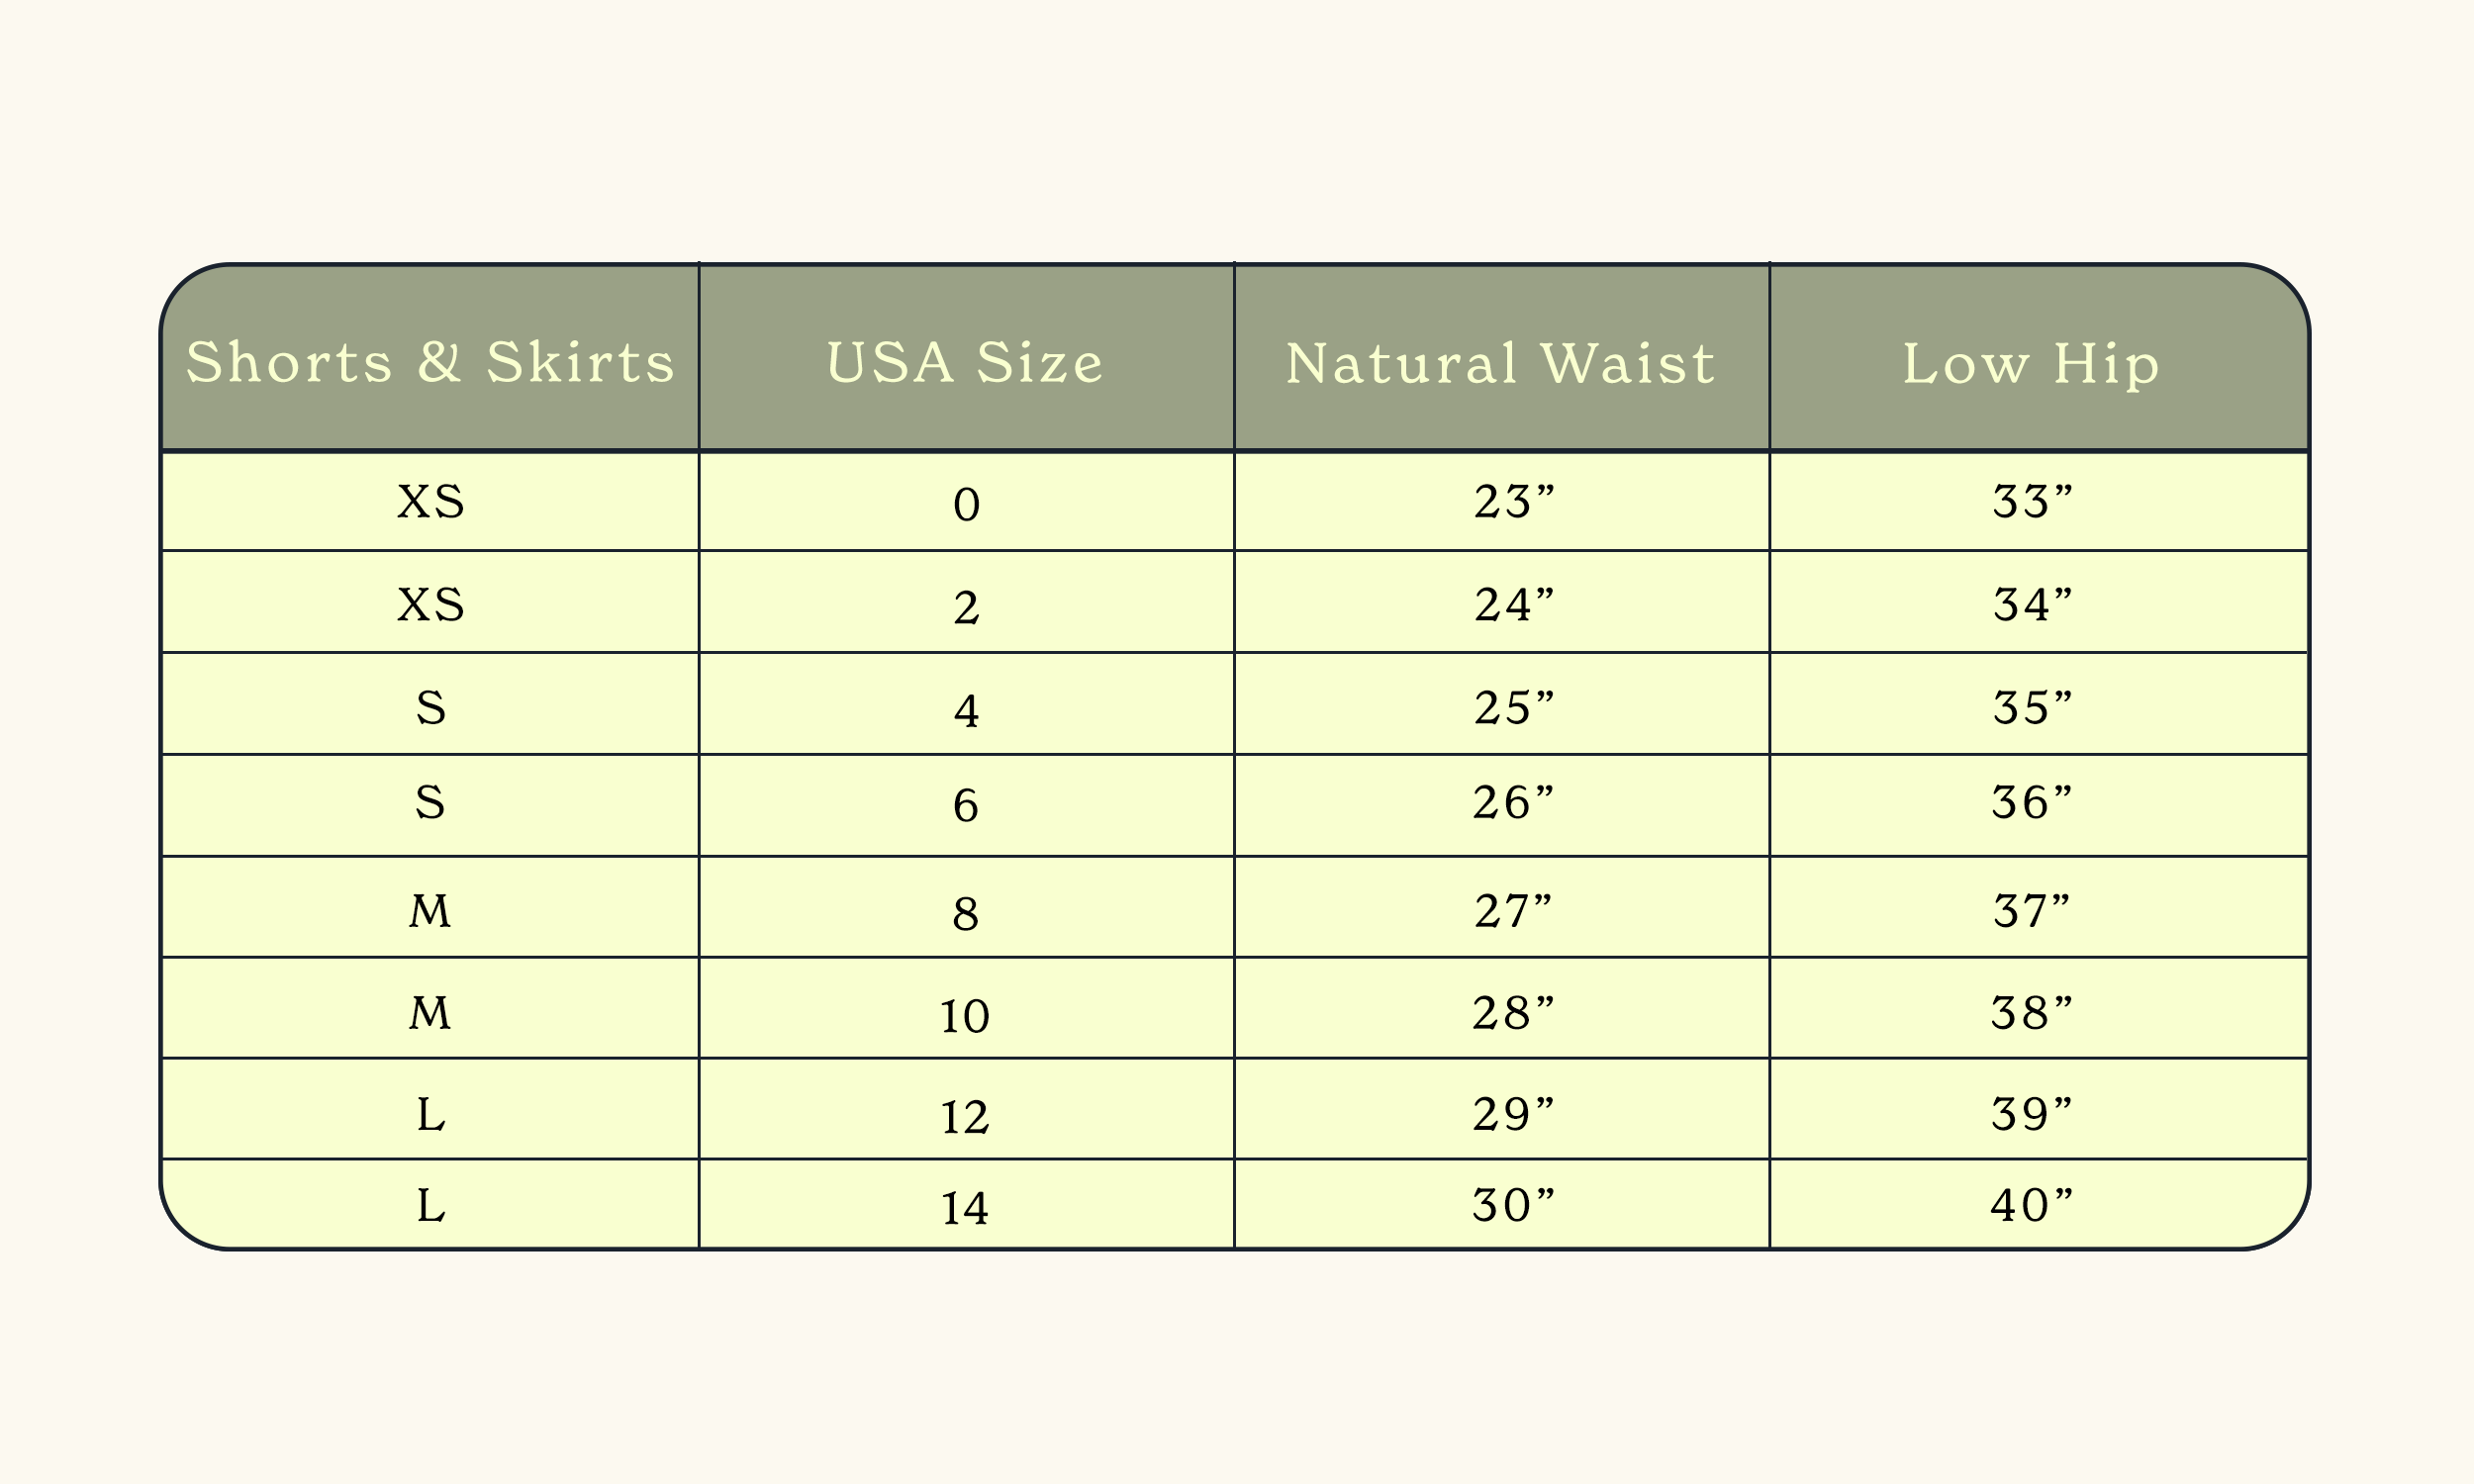 In Hollywood Jeans Size Chart